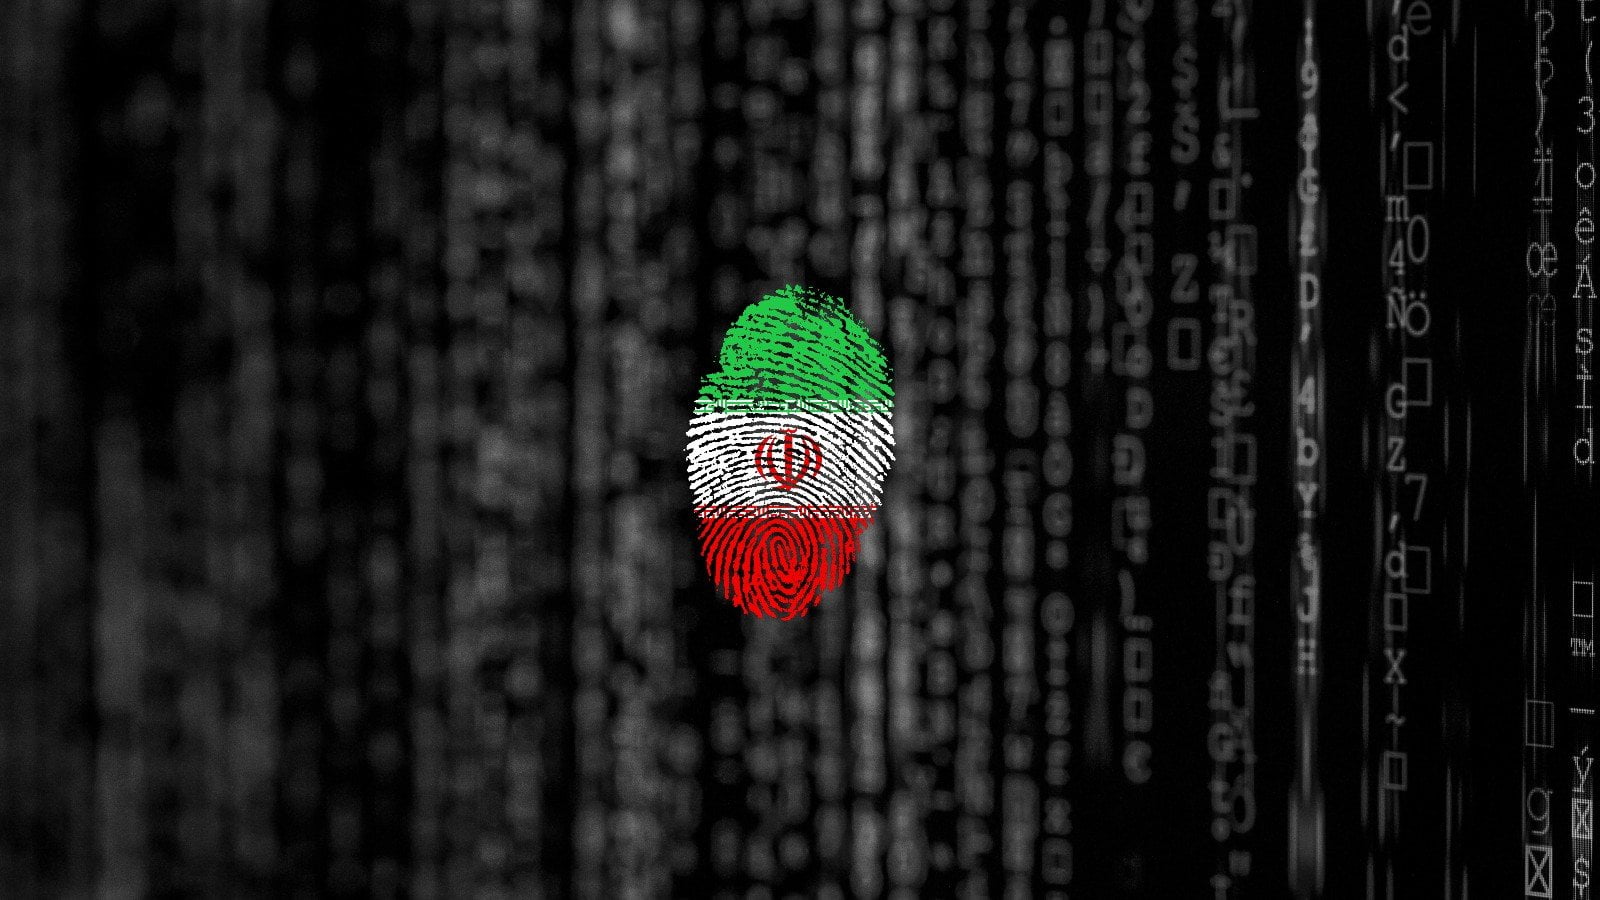 Iranian hacking group targets Israel with wiper disguised as ransomware